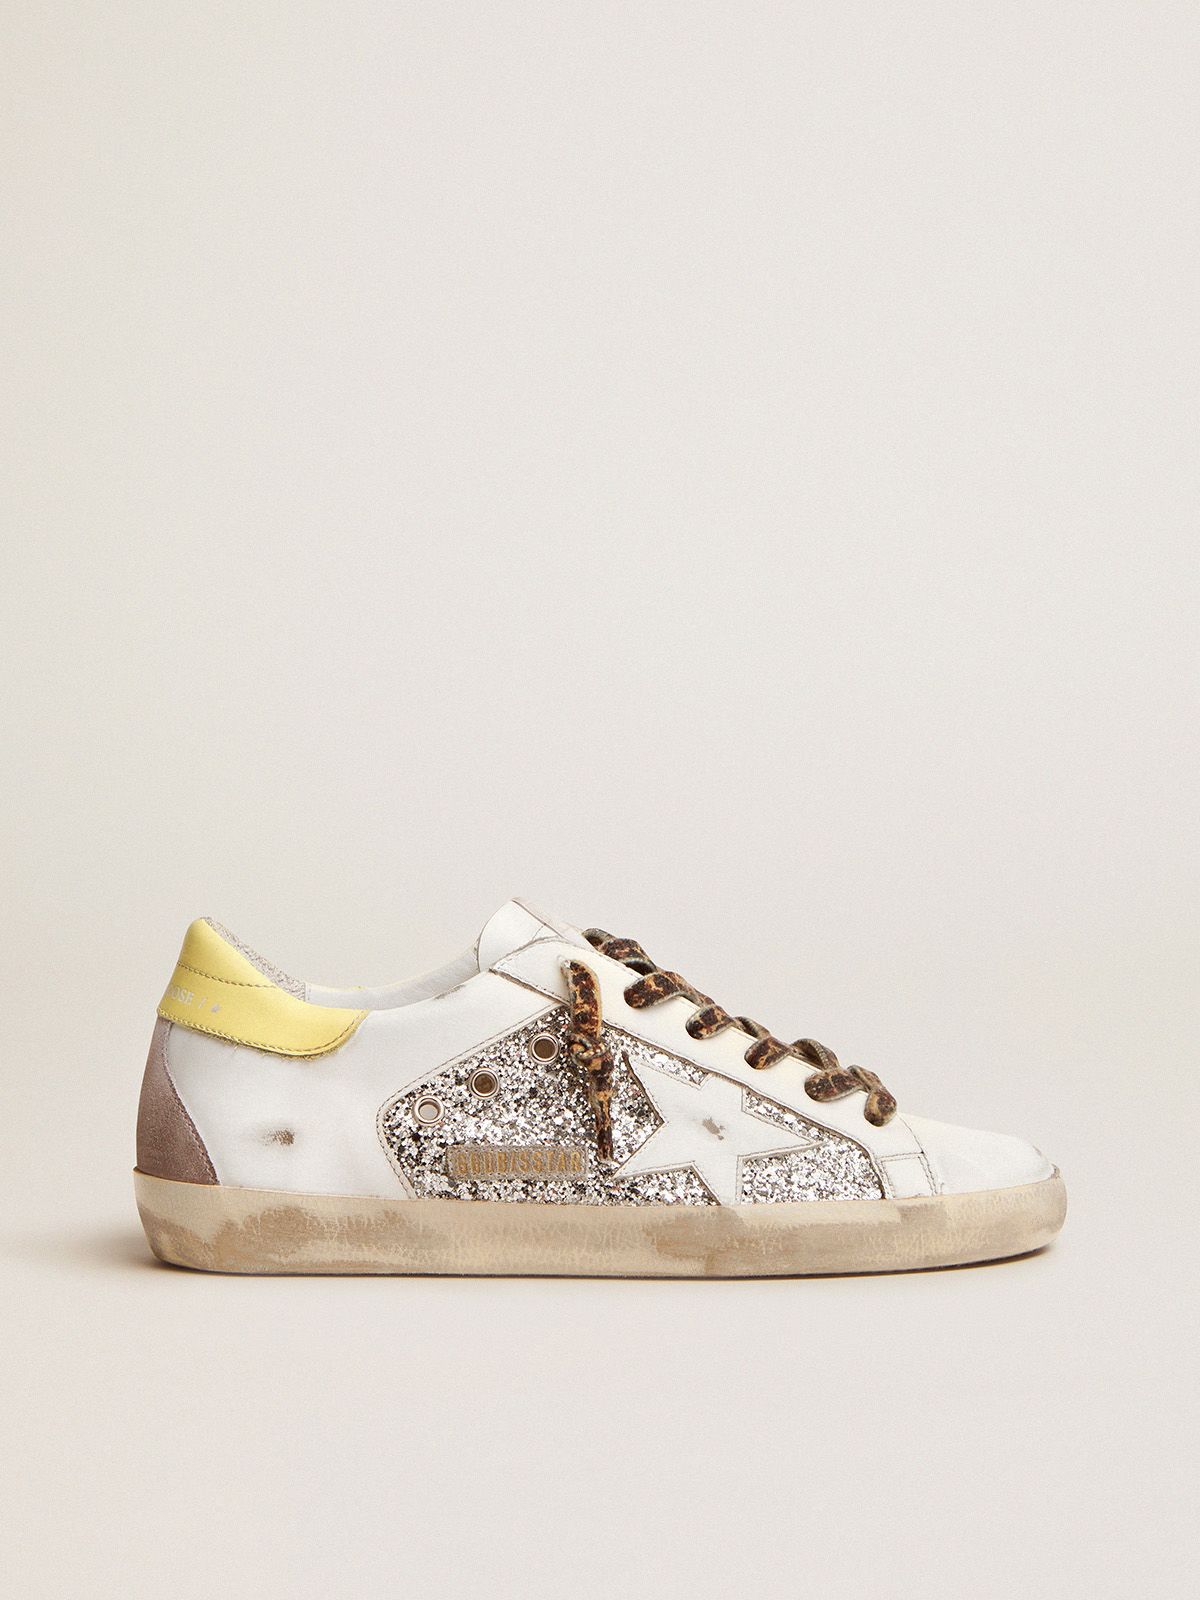 LTD Super-Star Sneakers in leather and glitter with colorful heel tab